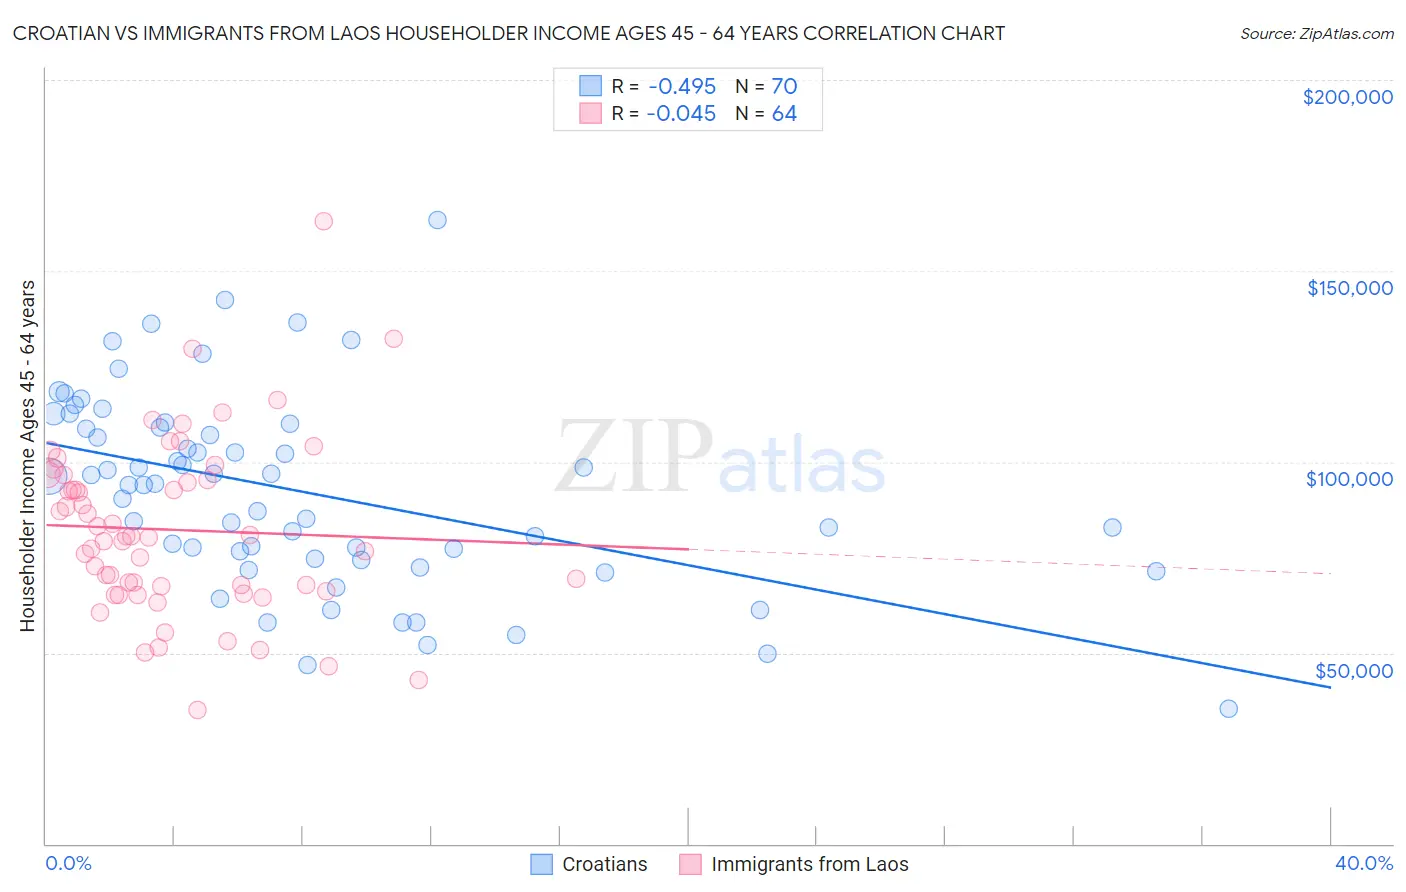 Croatian vs Immigrants from Laos Householder Income Ages 45 - 64 years